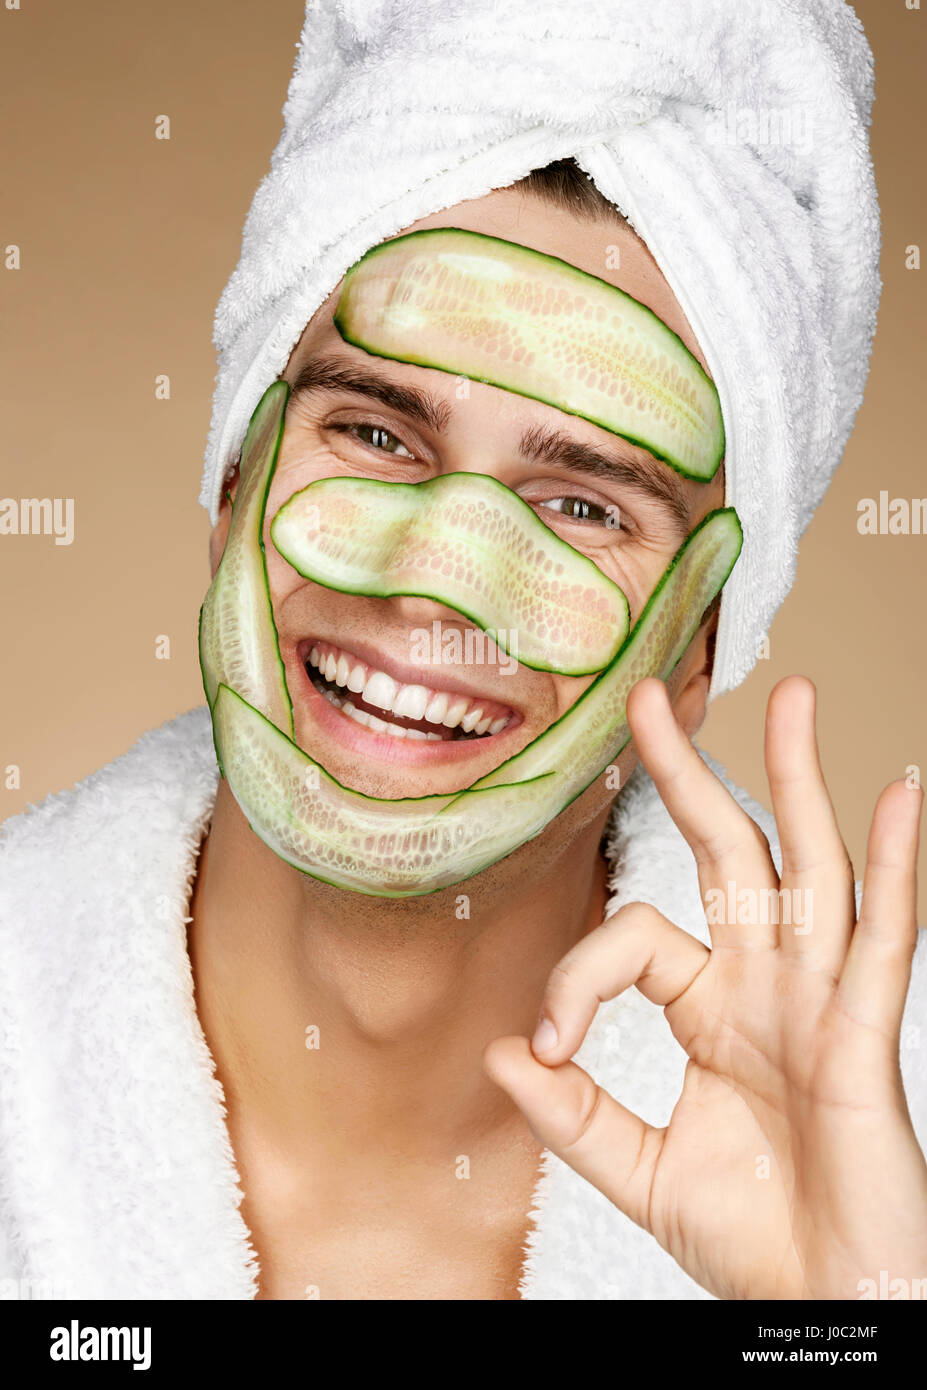 Funny man receiving facial mask of cucumber and showing okay gesture. Cosmetic procedure man's face. Grooming himself Stock Photo